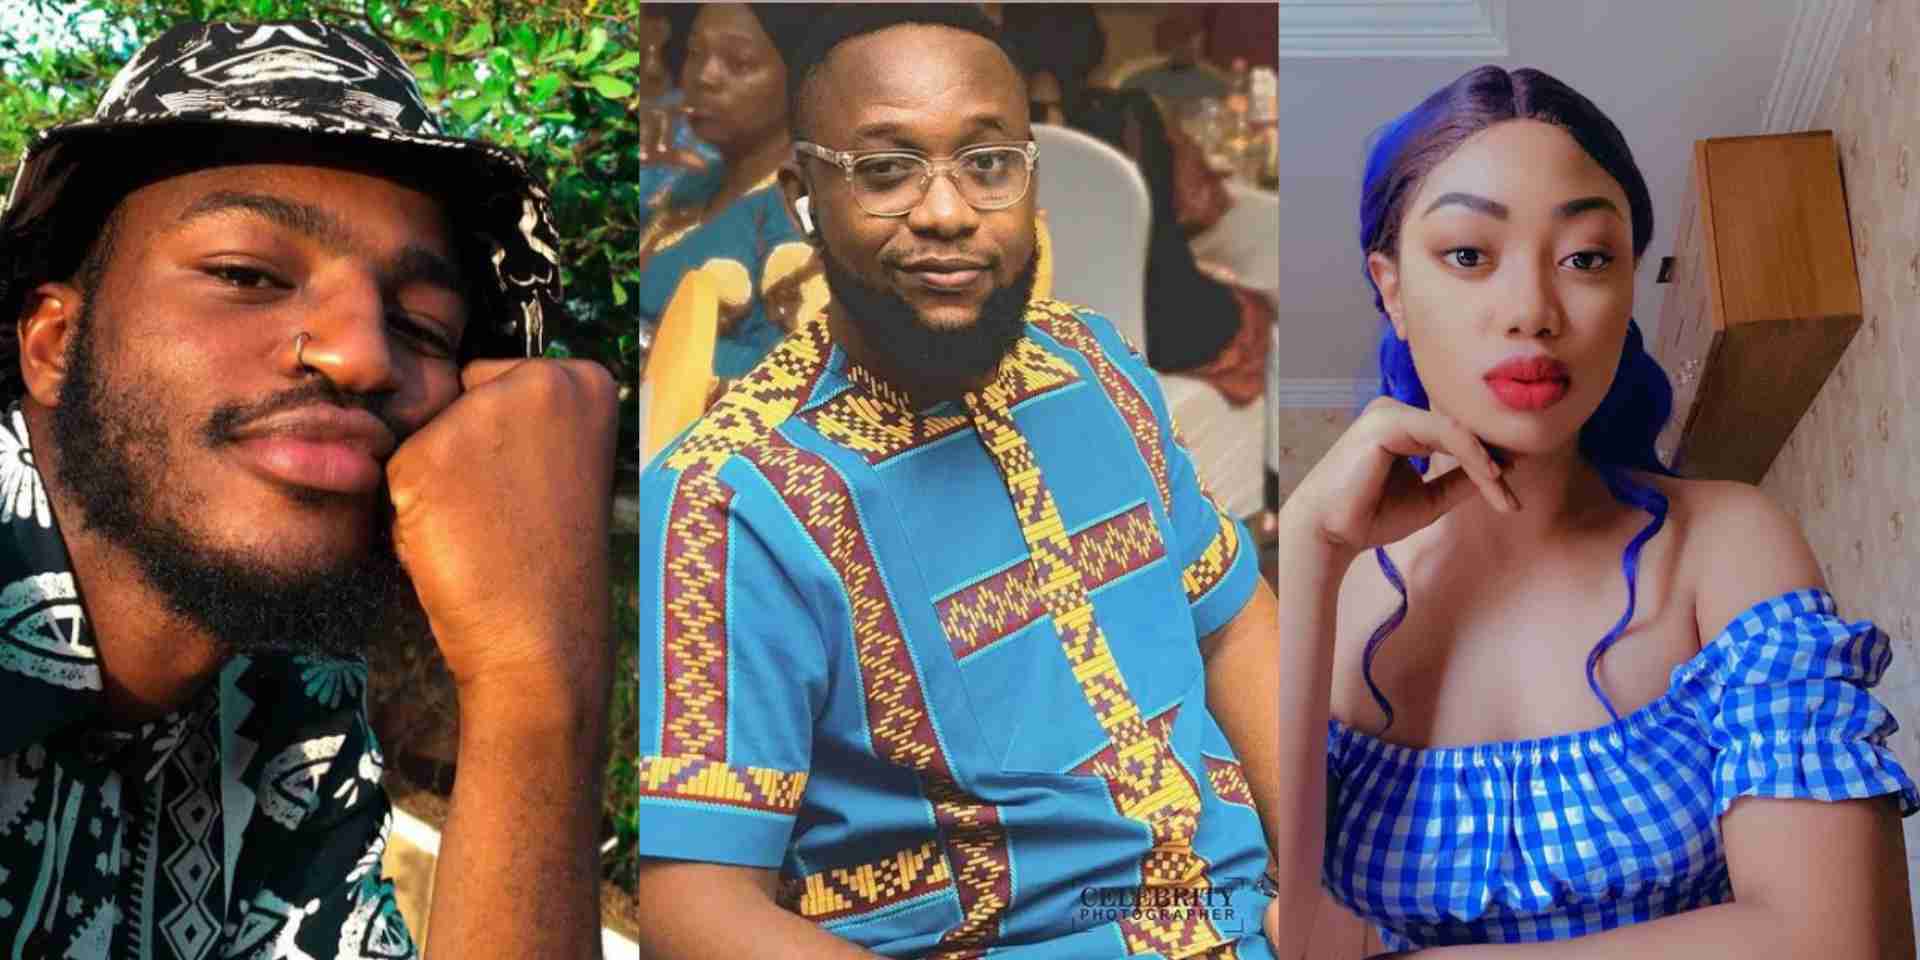 #BBNaija: How viewers voted for the bottom 3 housemates